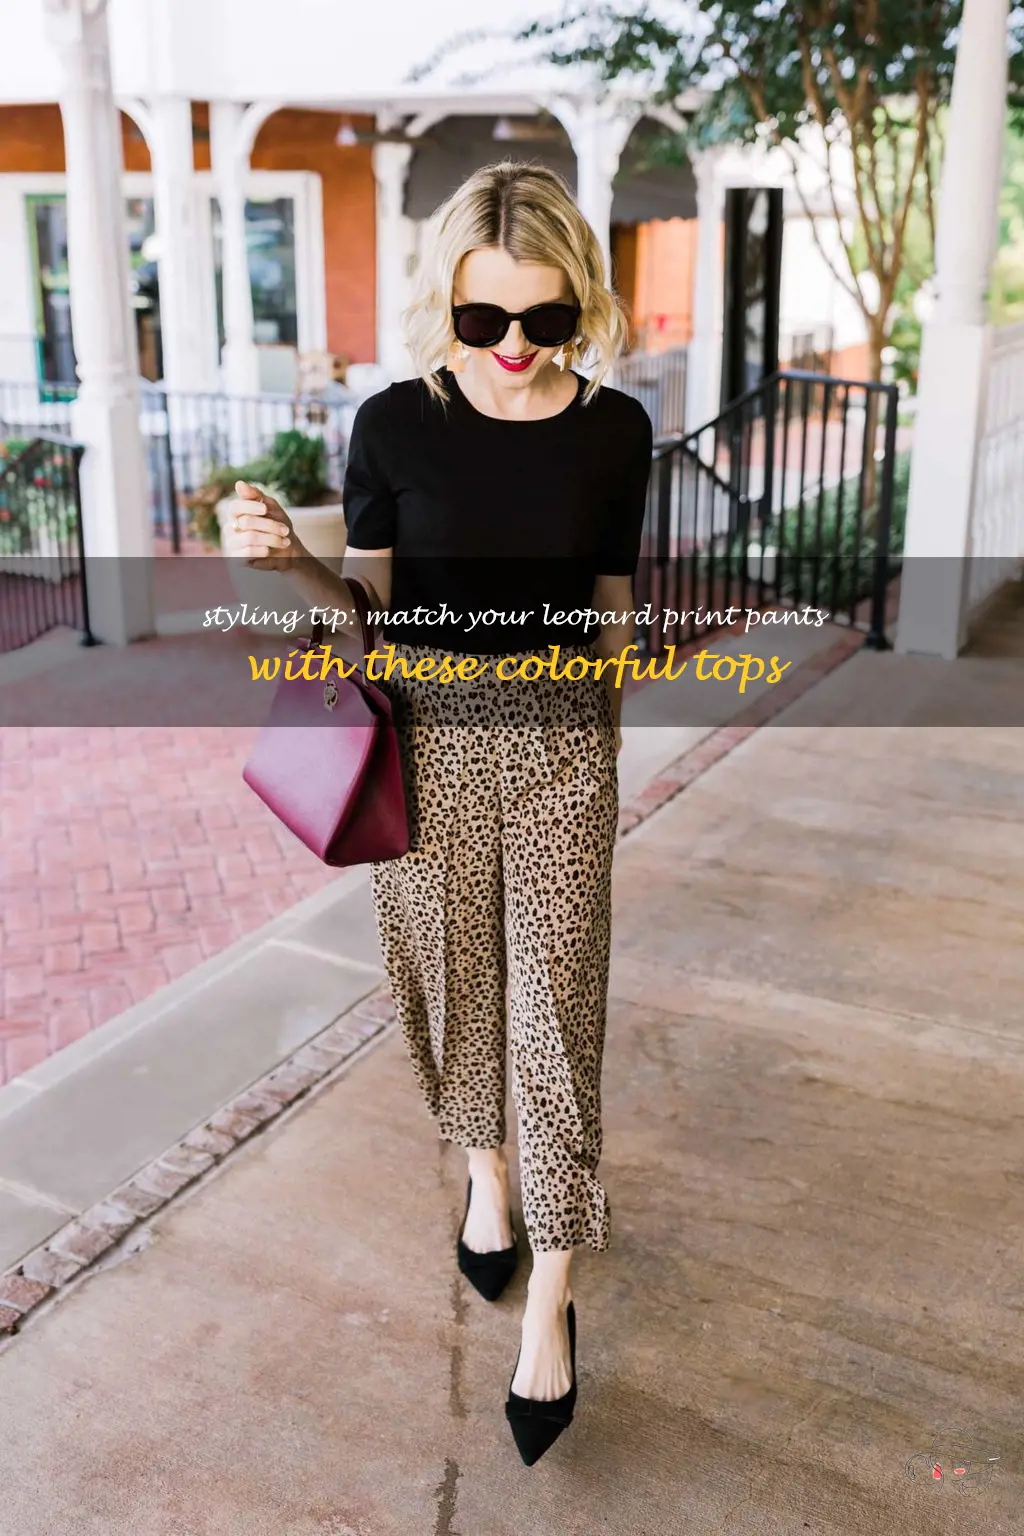 Styling Tip: Match Your Leopard Print Pants With These Colorful Tops ...